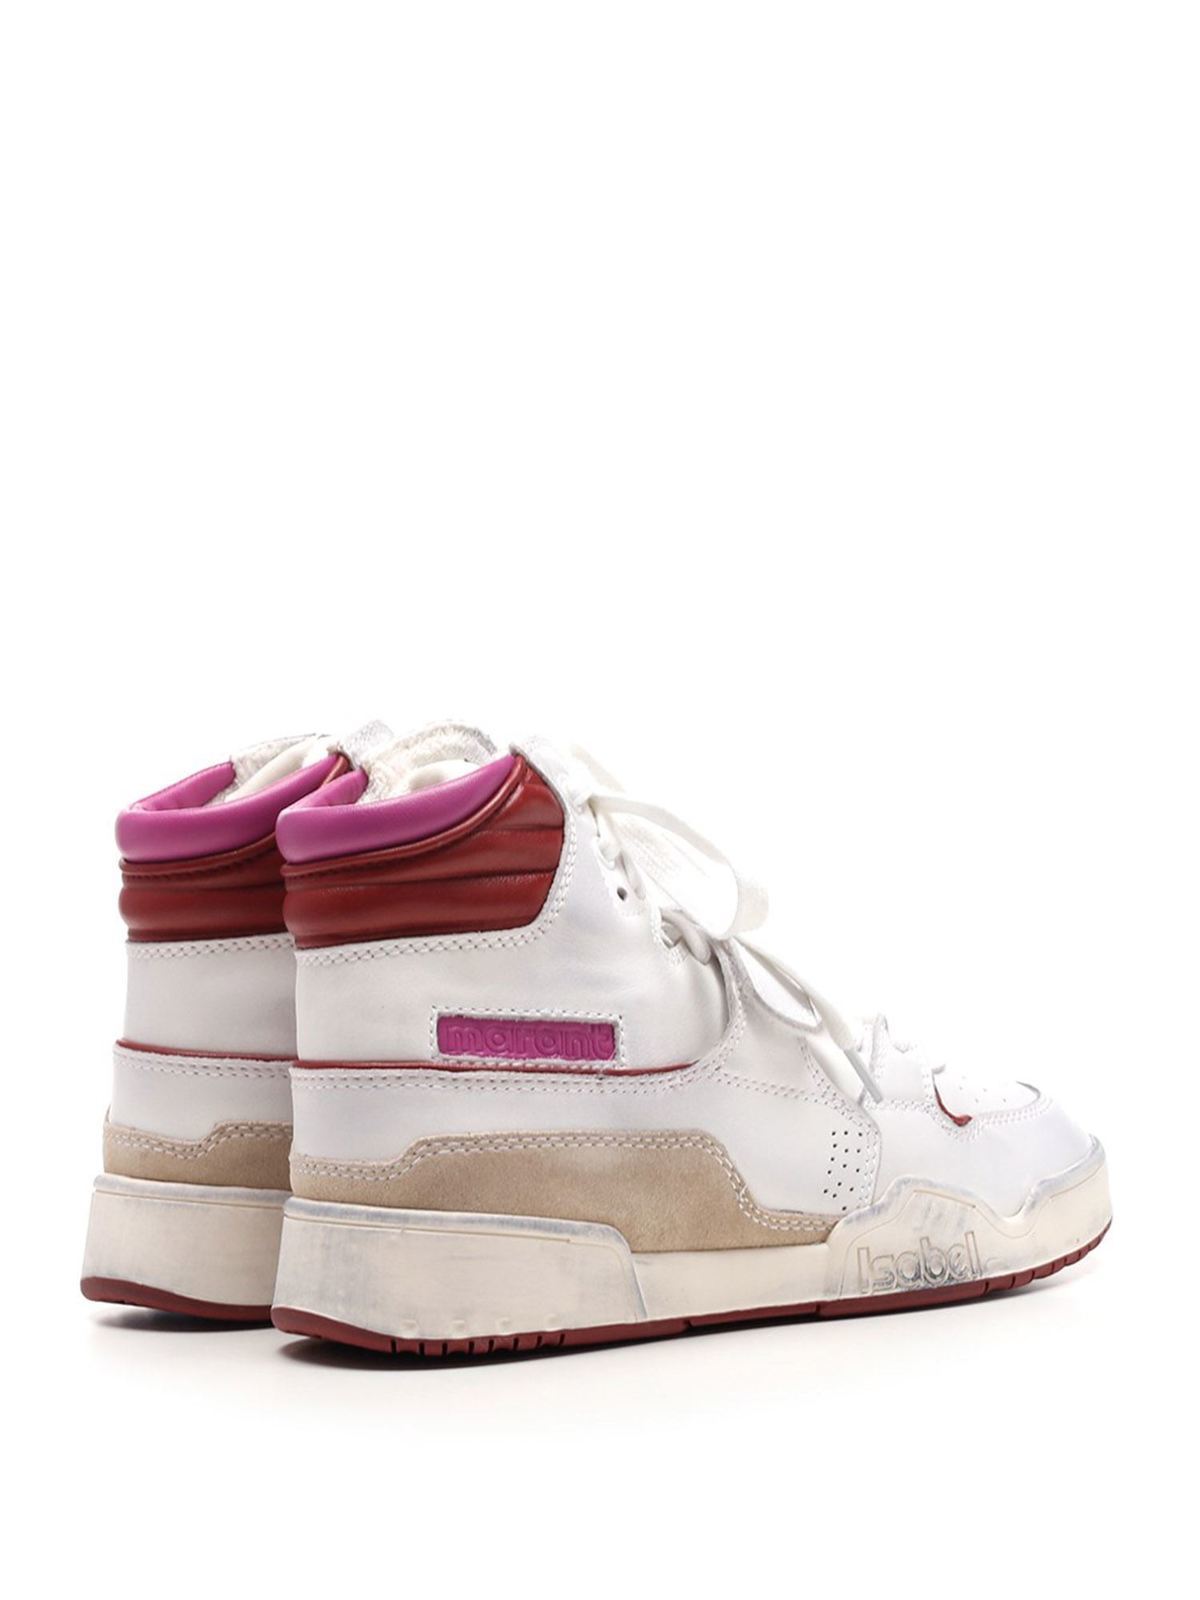 Trainers Isabel Marant - High sneakers burgundy and pink - BK026621P031S80BY